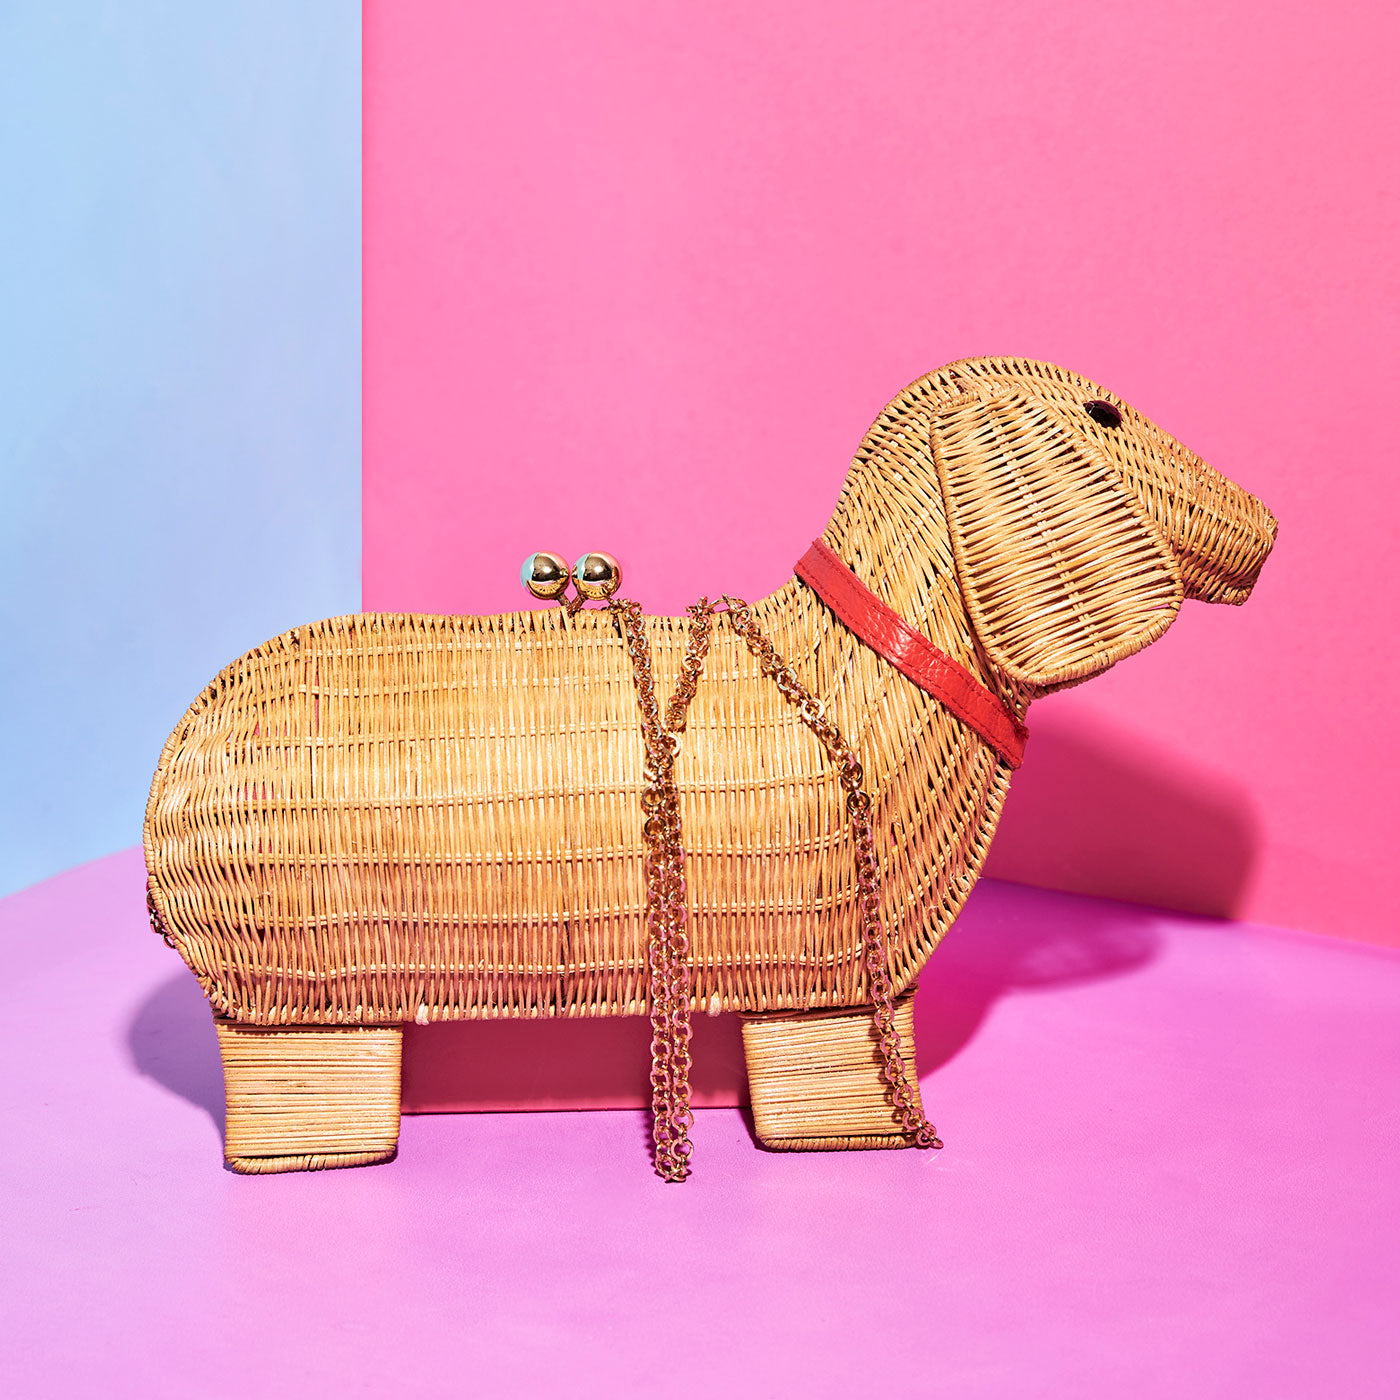 Mash the sausage dog Wicker Darling clutch on a pink, blue background